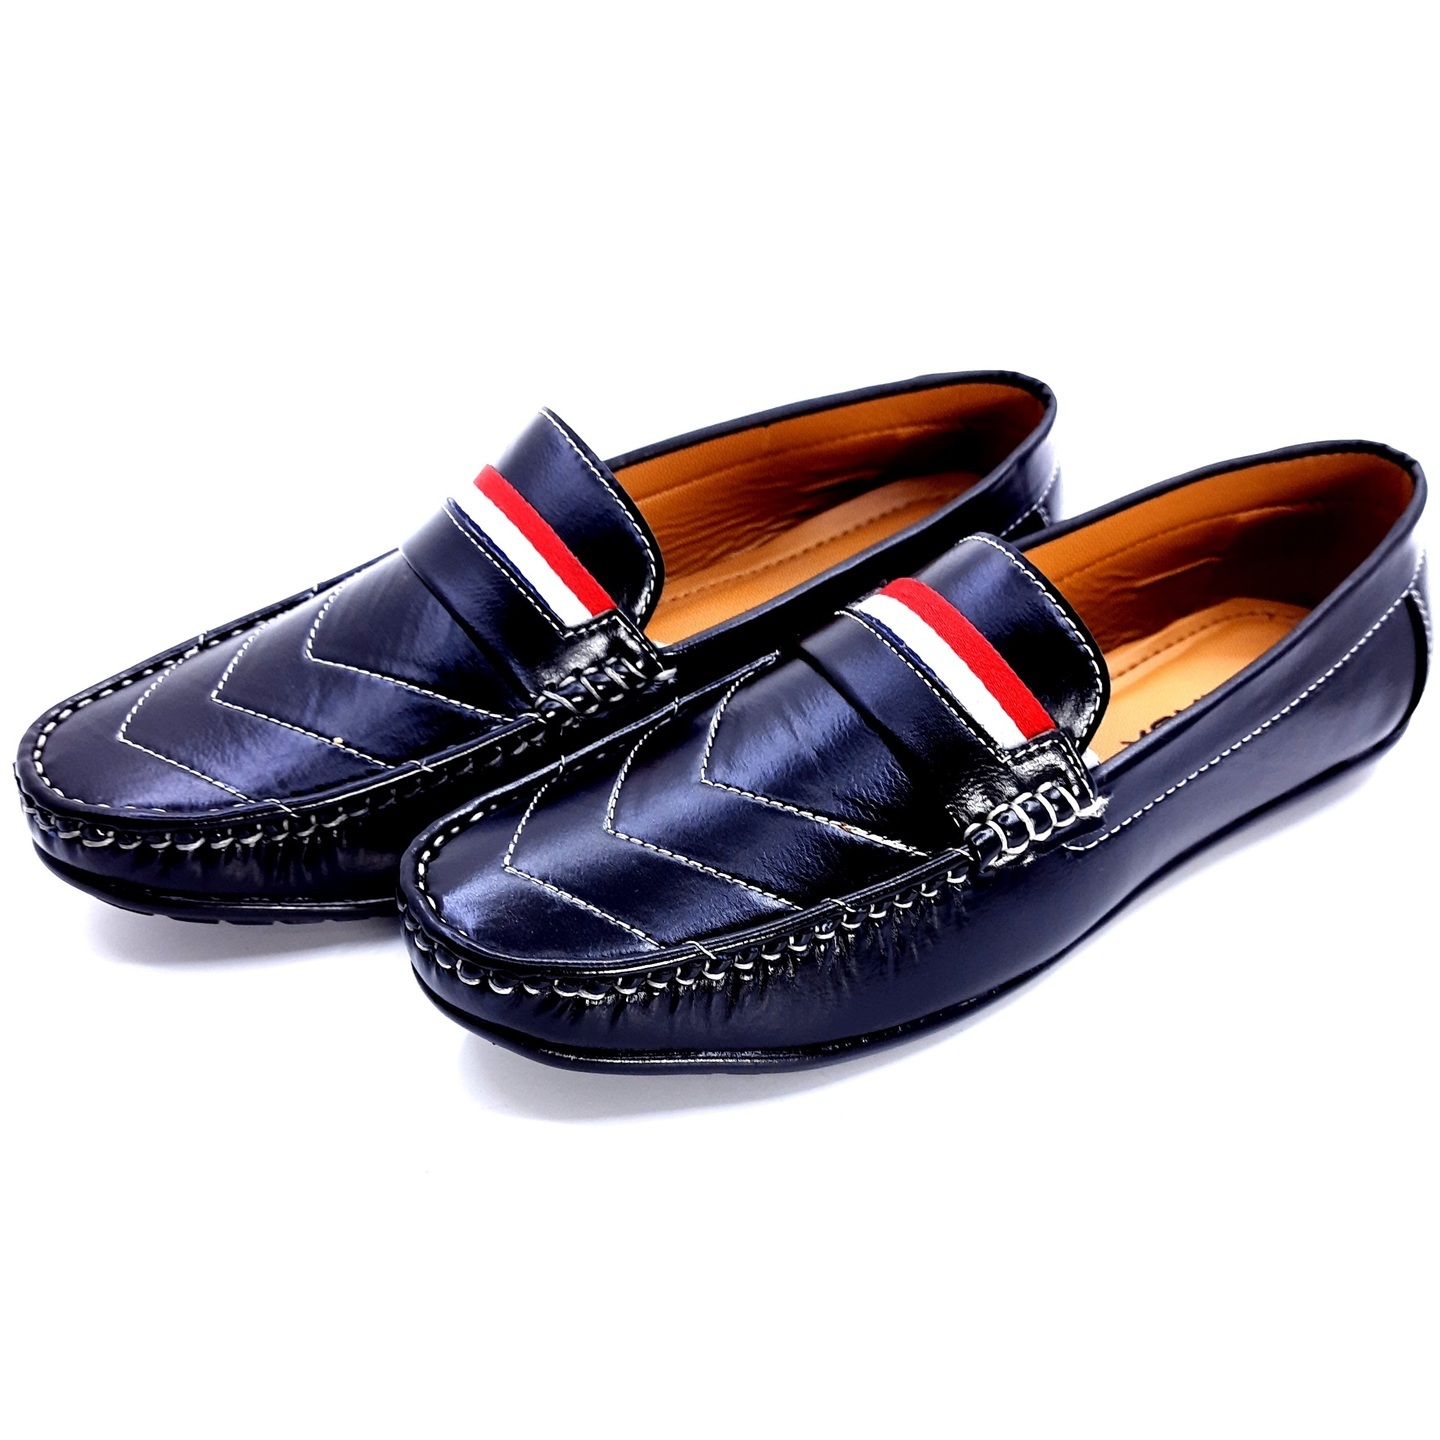 CORWOX Mens Stylish Loafer Shoes Black